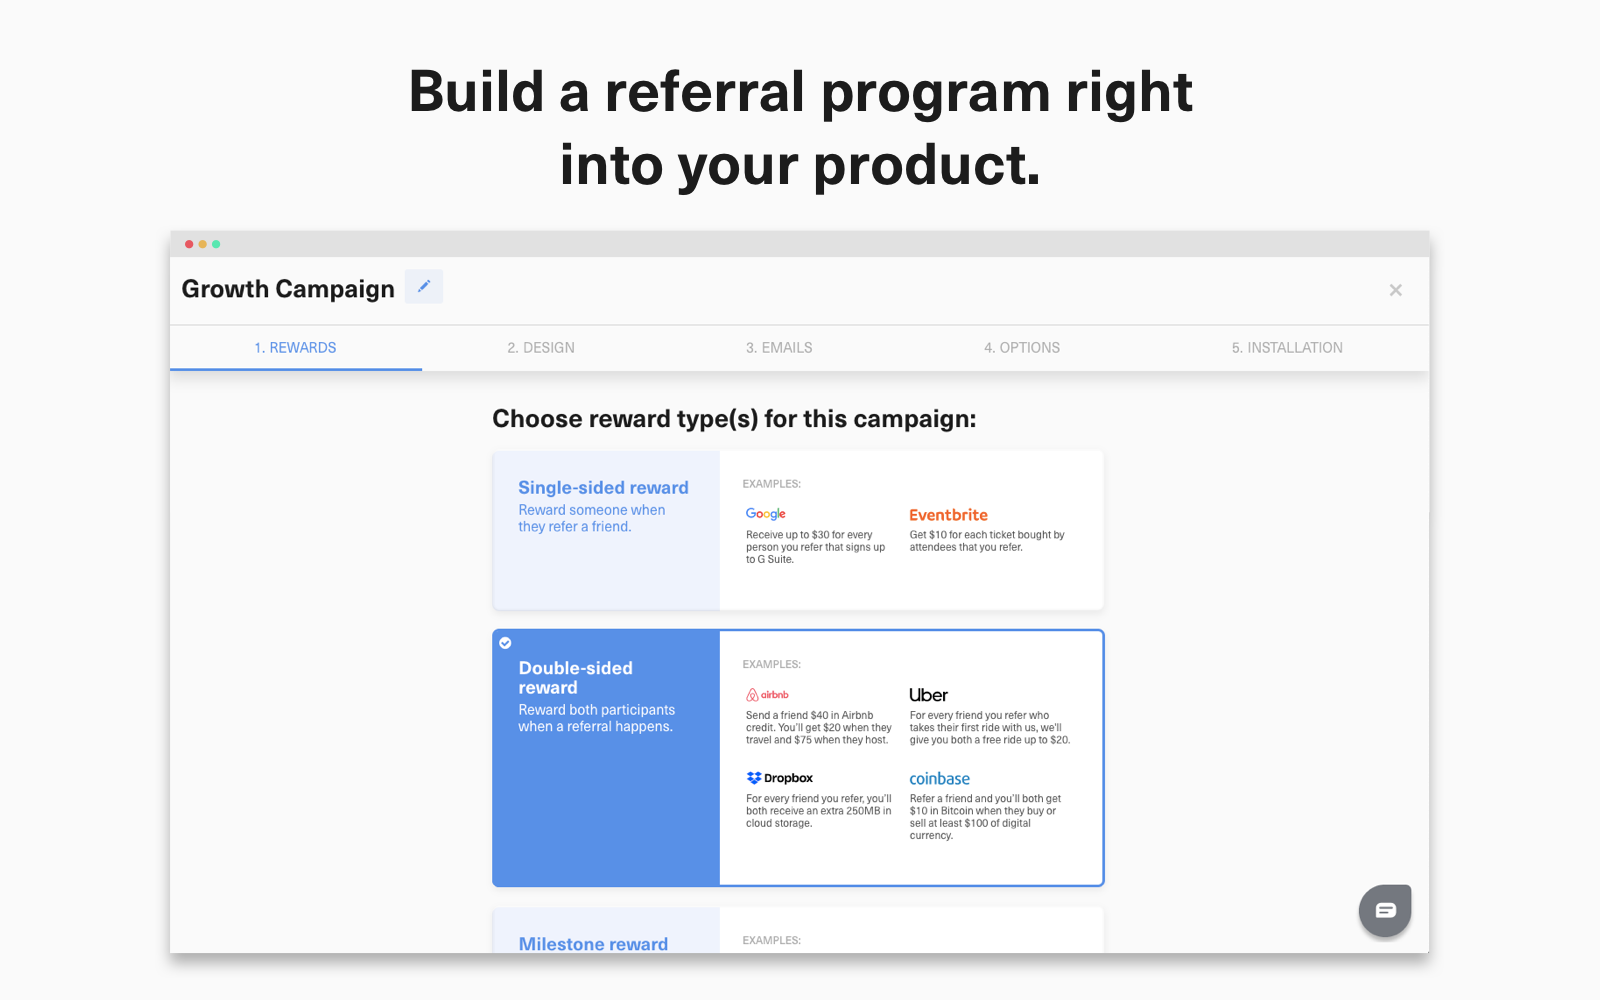 Build a referral program right into your product. With GrowSurf, you can get a referral program up-and-running within a day.